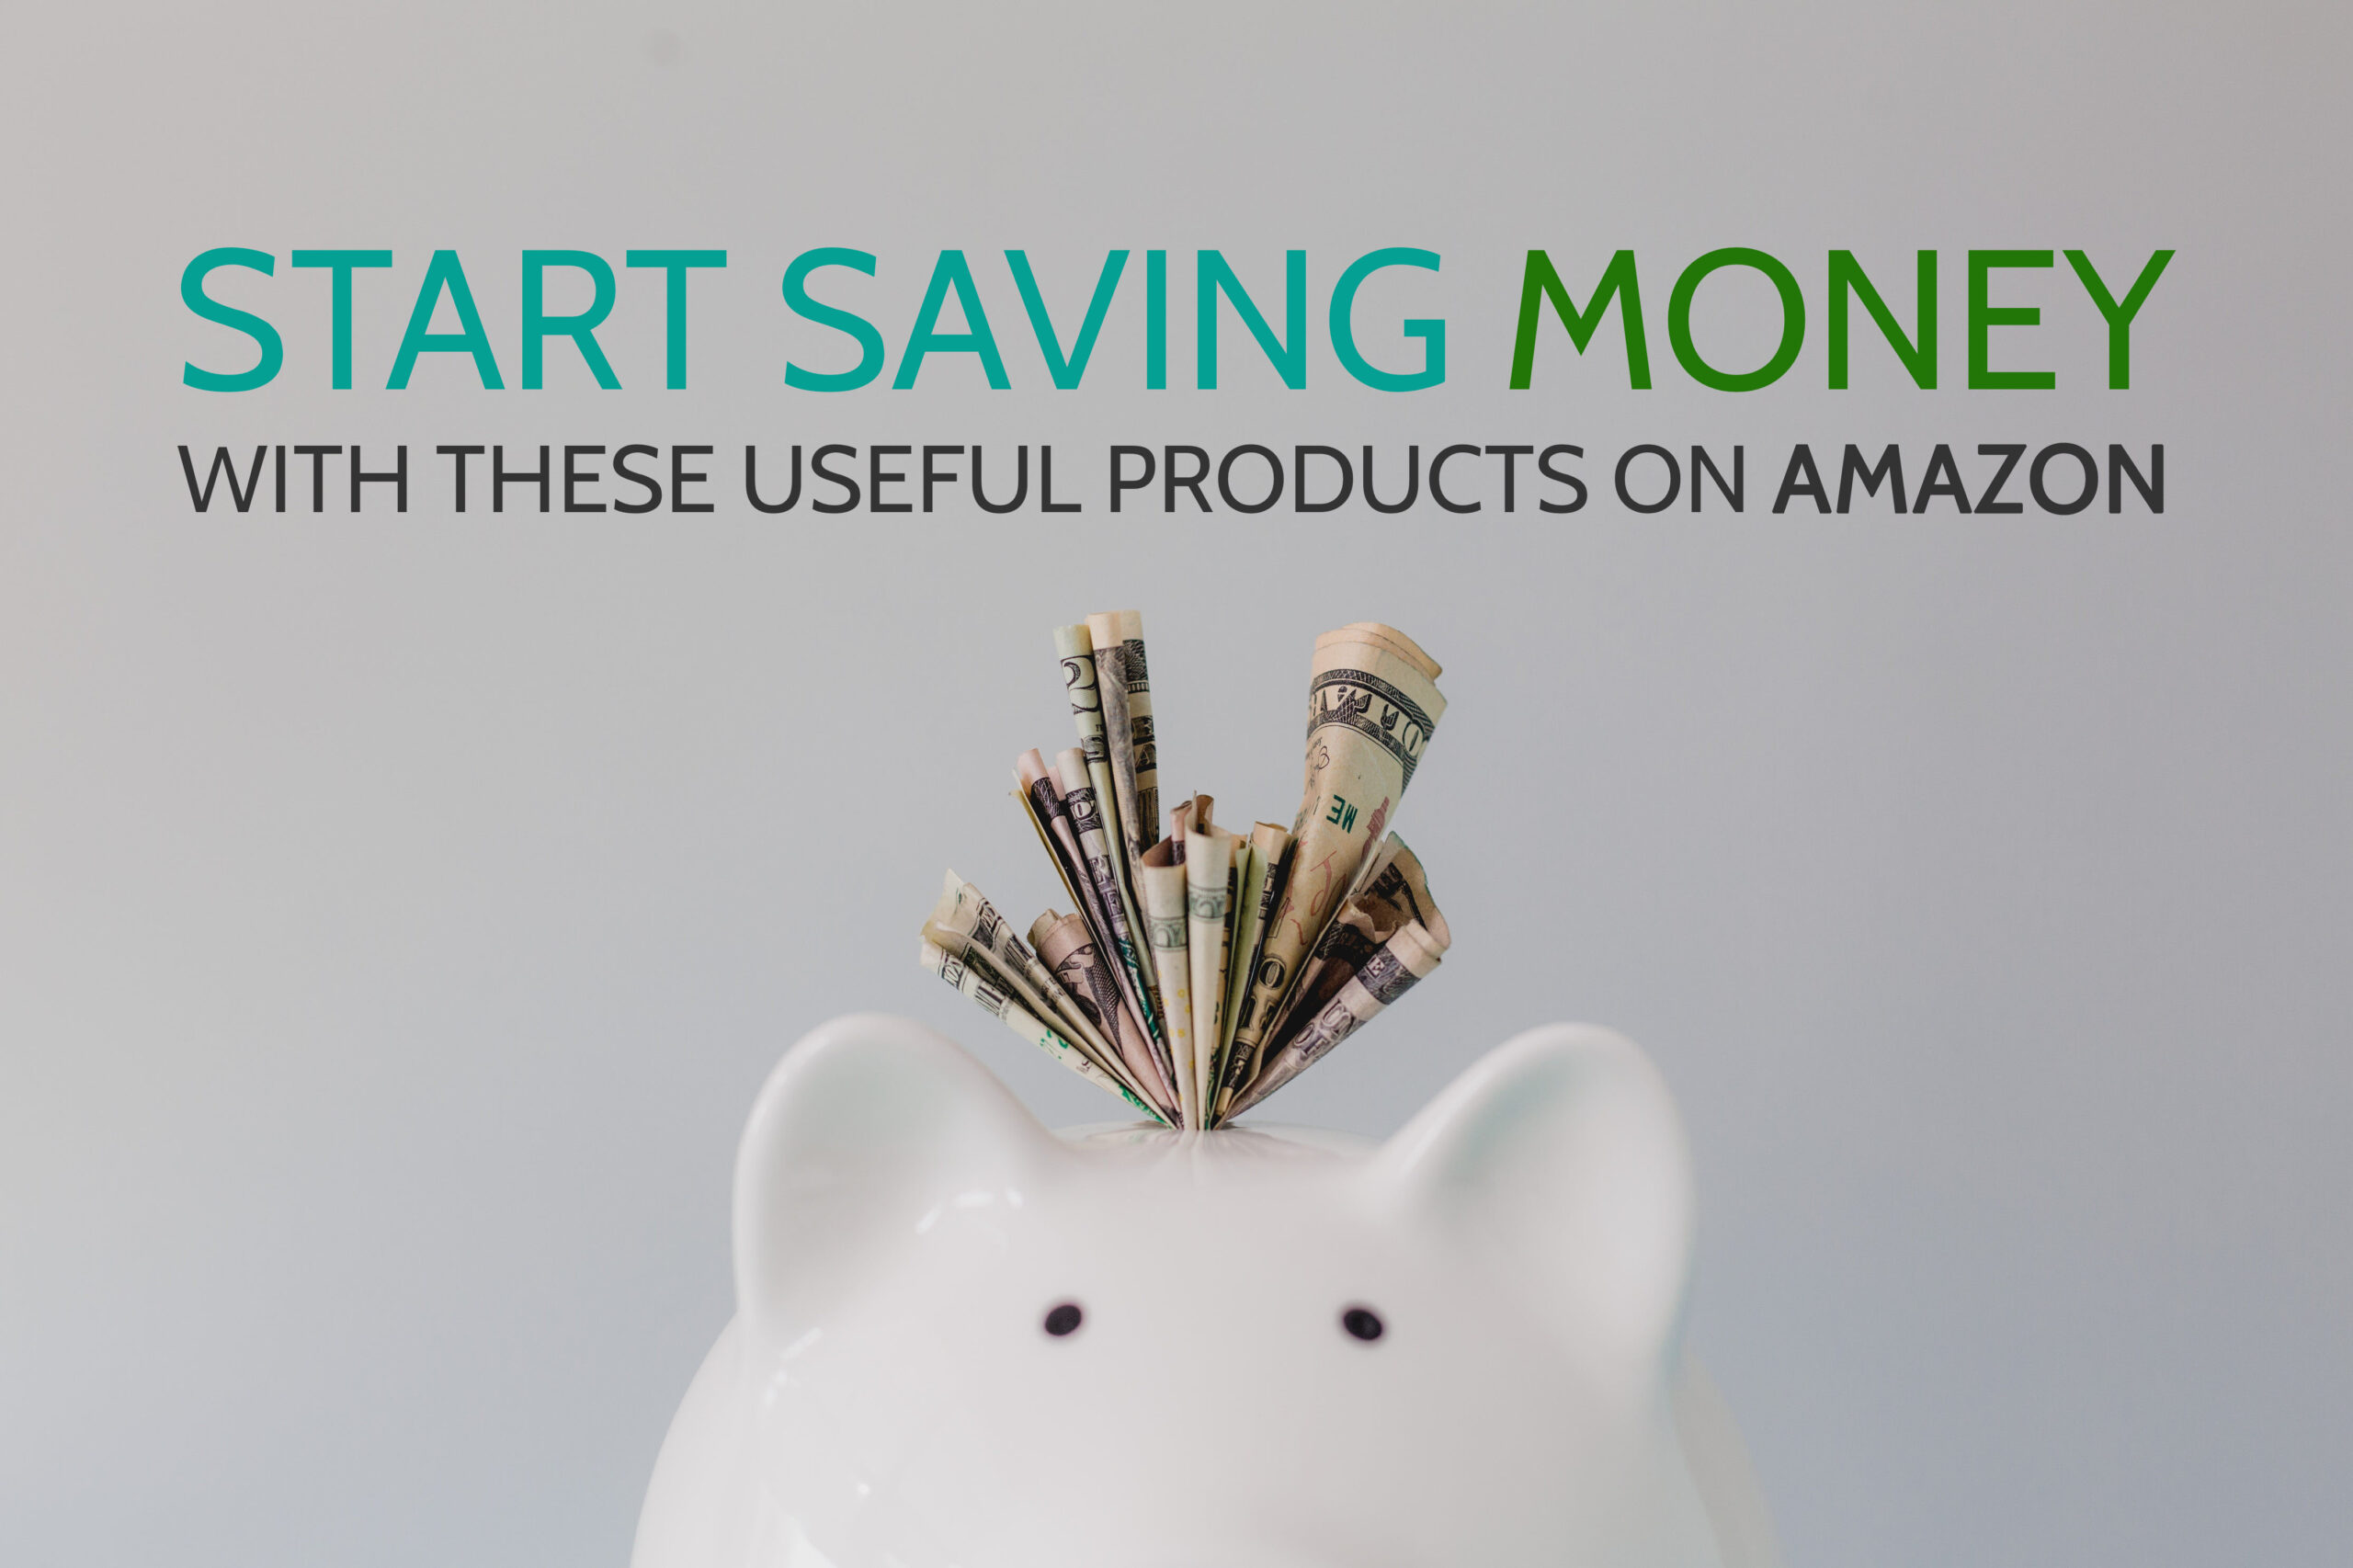 Start Saving Money With These Useful Products On Amazon